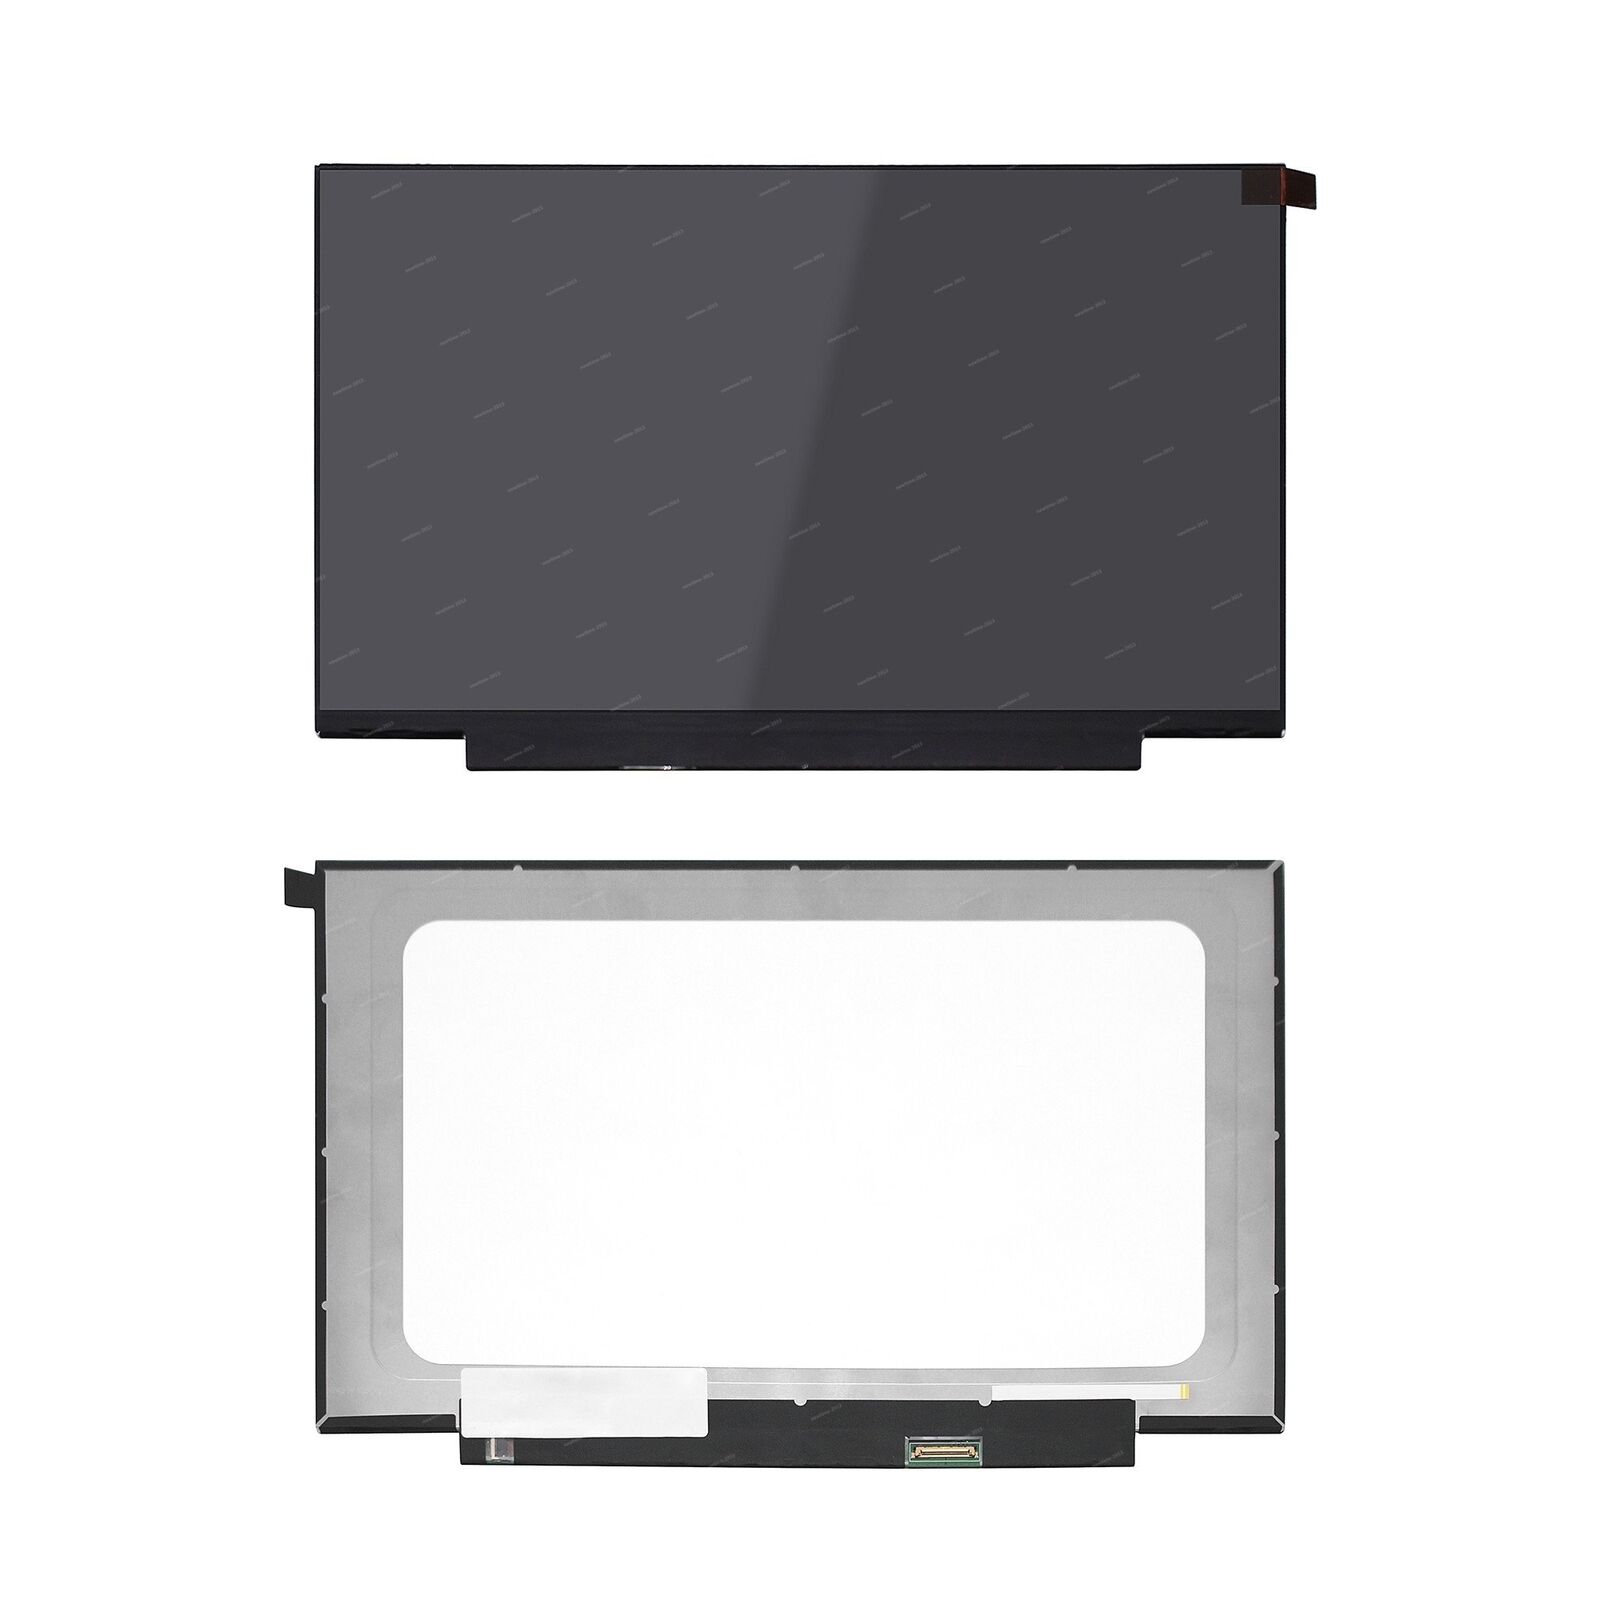 NV140FHM-N48 NV140FHM-N49 V8.1 FHD IPS LED LCD Display Screen Panel Replacement